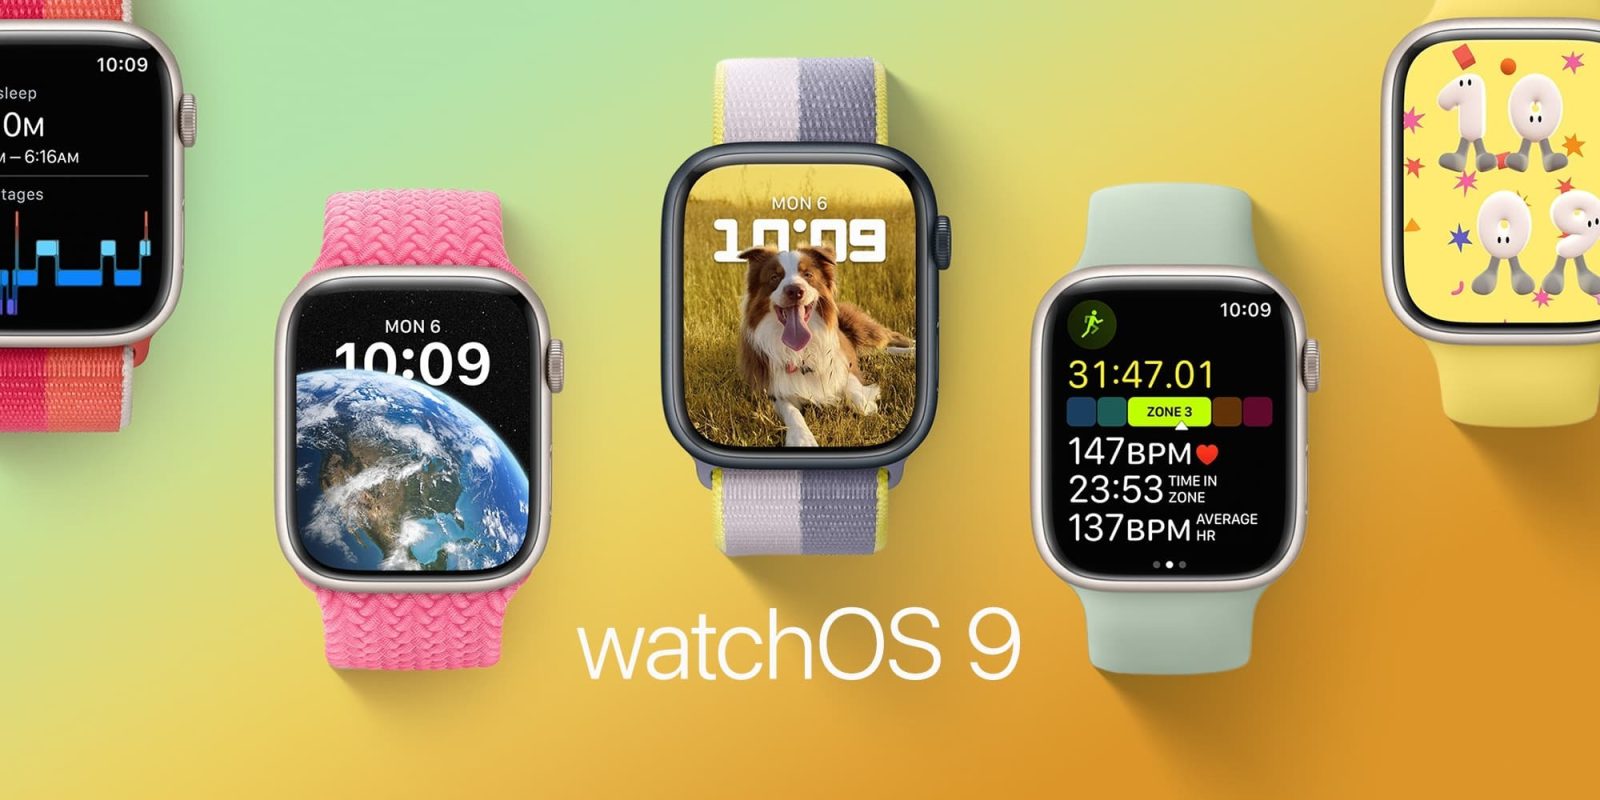 watchOS 9.1 beta 4 update is now available to developers